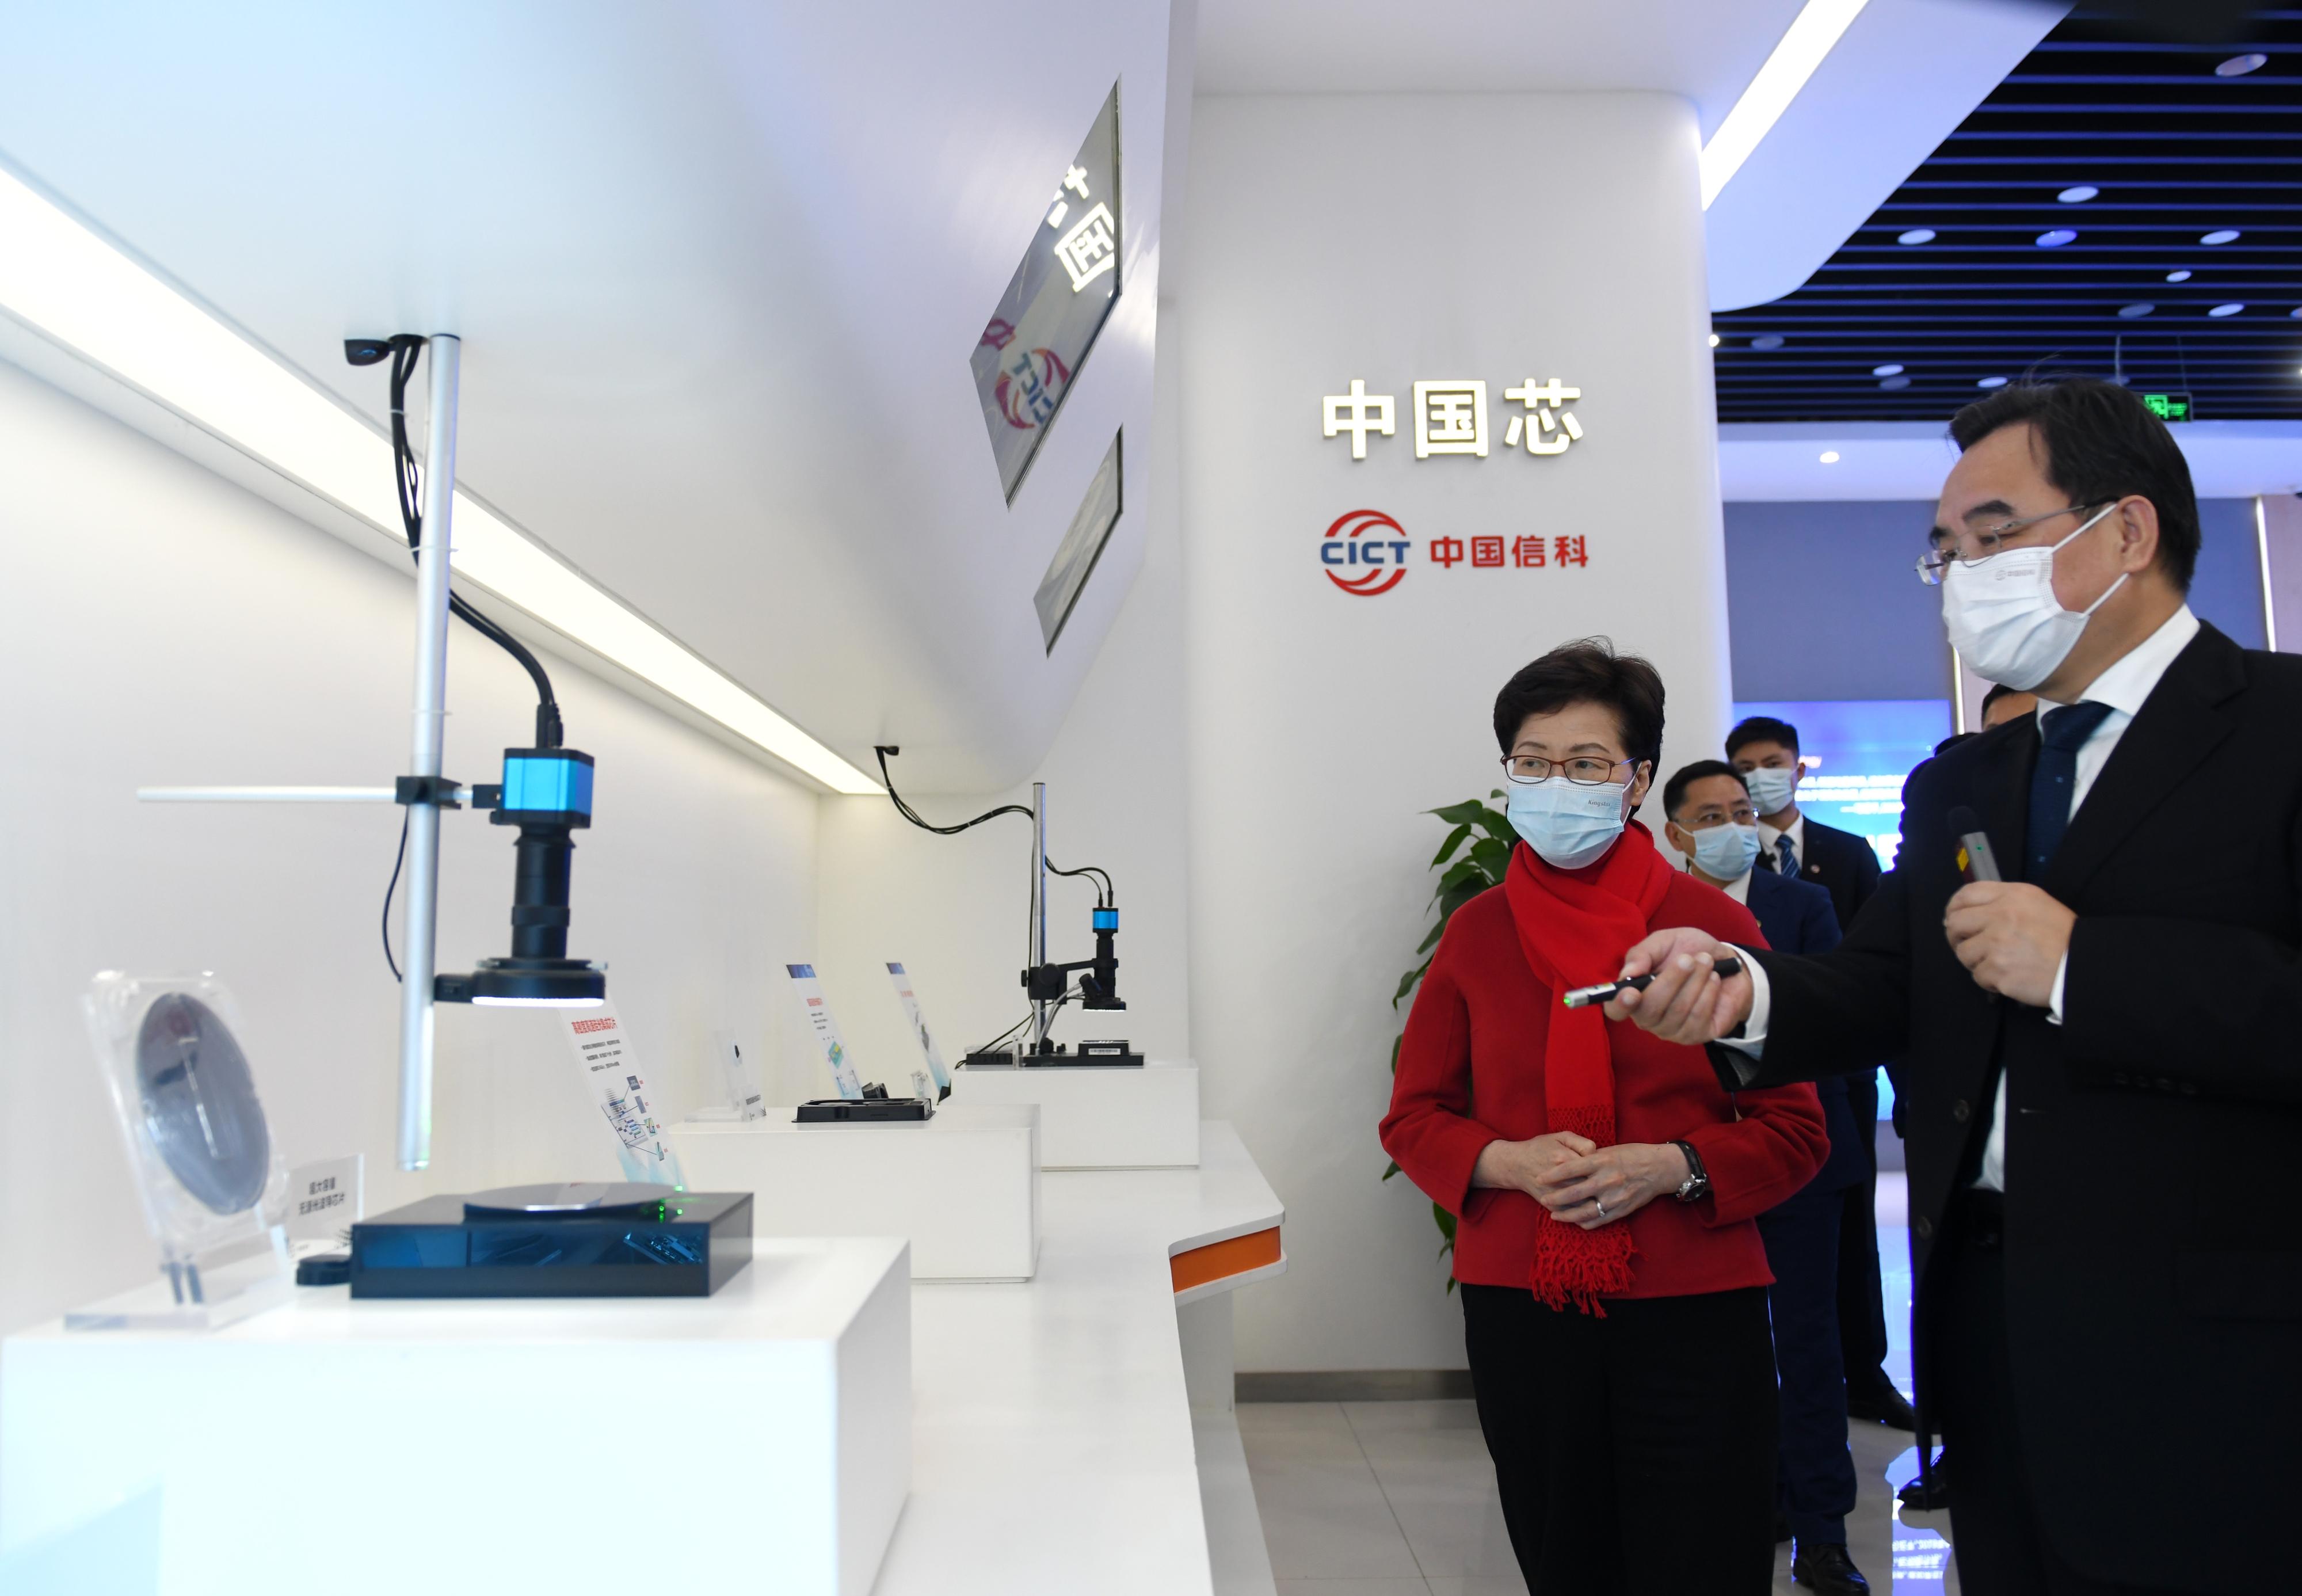 The Chief Executive, Mrs Carrie Lam, visited the Wuhan East Lake High-tech Development Zone in Wuhan today (November 30). Photo shows Mrs Lam (left) visiting a major technology firm in the zone.